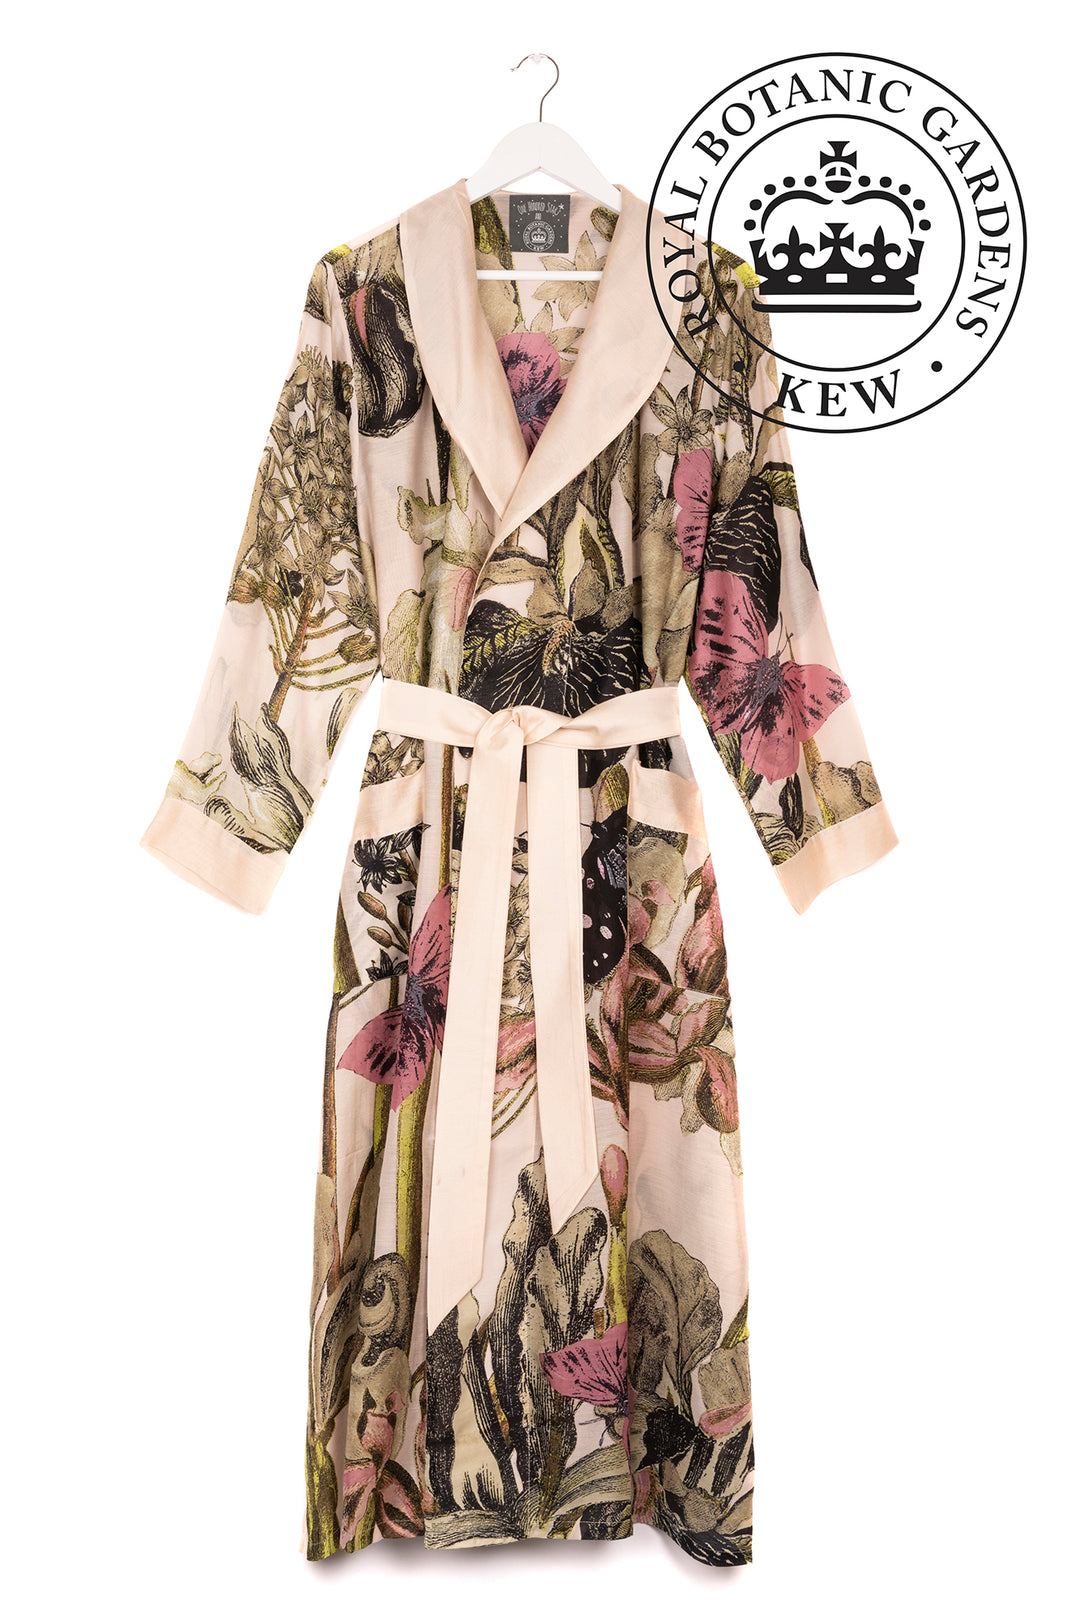 KEW Iris Blush Gown- This gown is perfect as a luxurious house coat or for layering as a chic accessory to your favourite outfit.